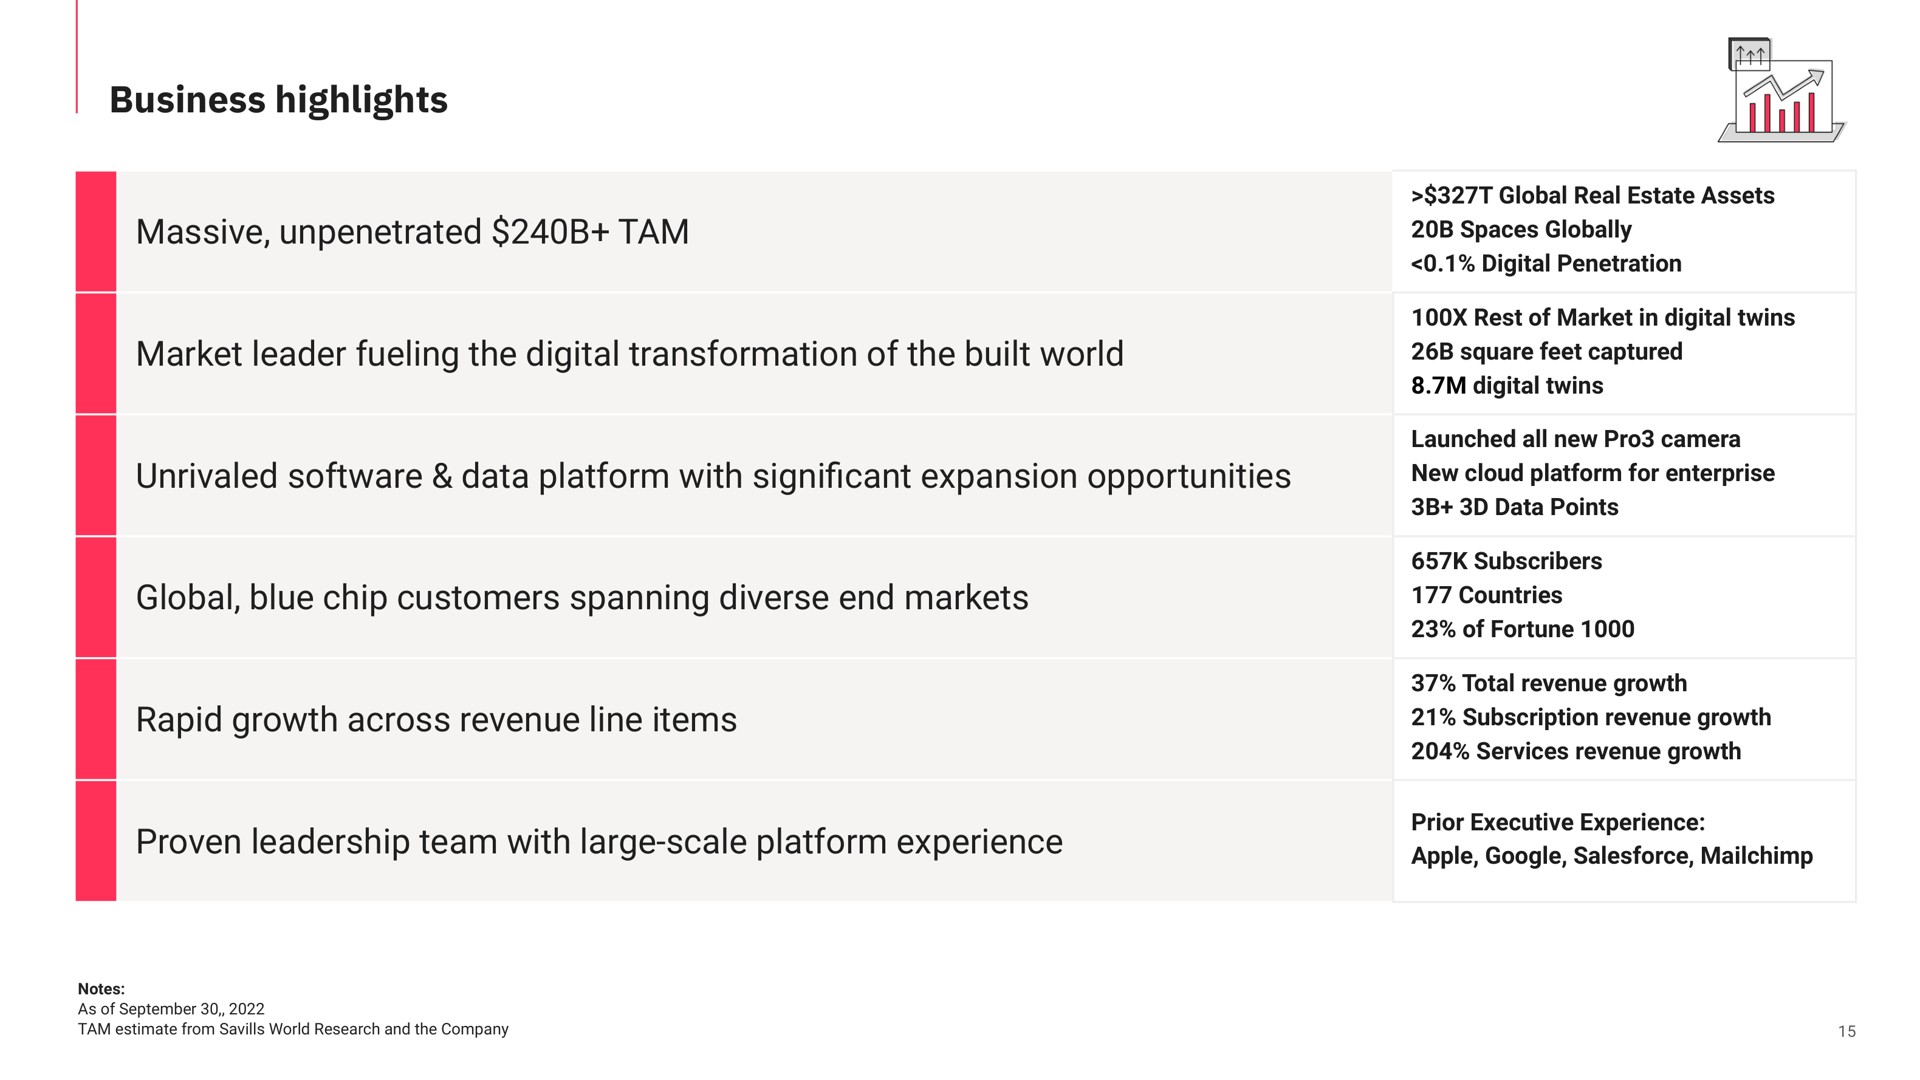 business highlights massive unpenetrated tam market leader fueling the digital transformation of the built world unrivaled data platform with cant expansion opportunities global blue chip customers spanning diverse end markets rapid growth across revenue line items proven leadership team with large scale platform experience significant | Matterport